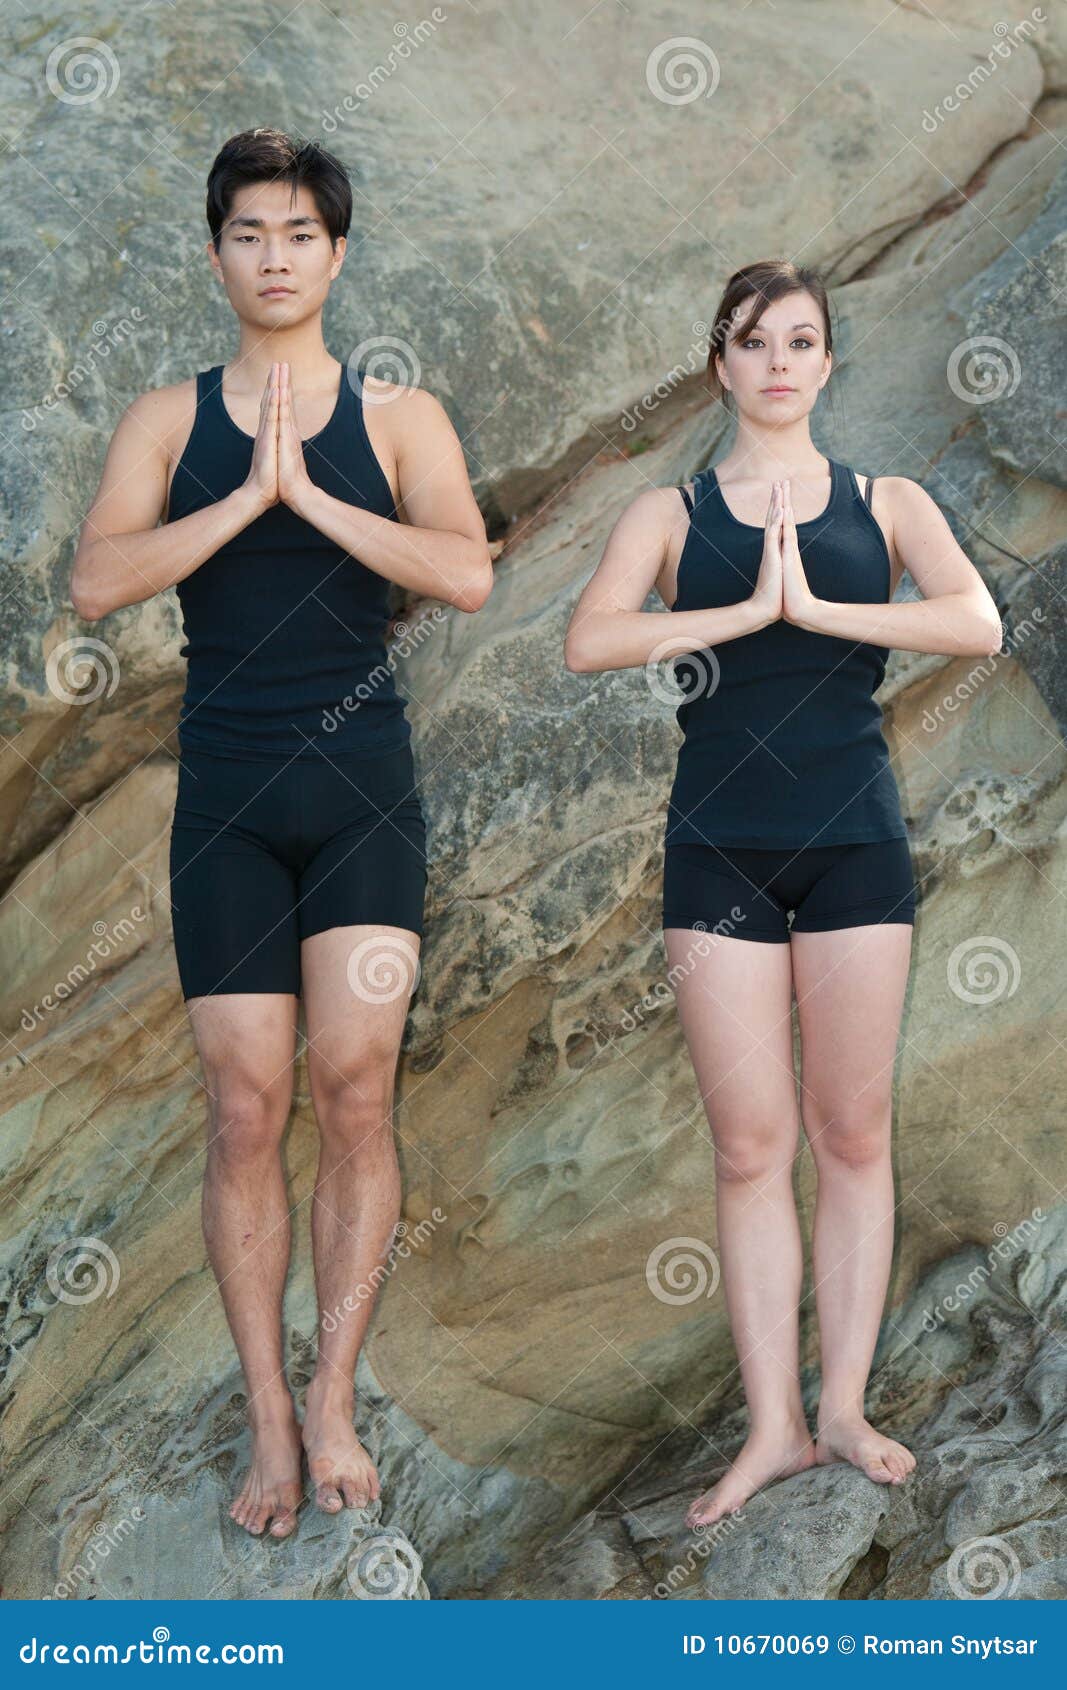 Yoga for couples stock image. Image of adult, peaceful - 10670069